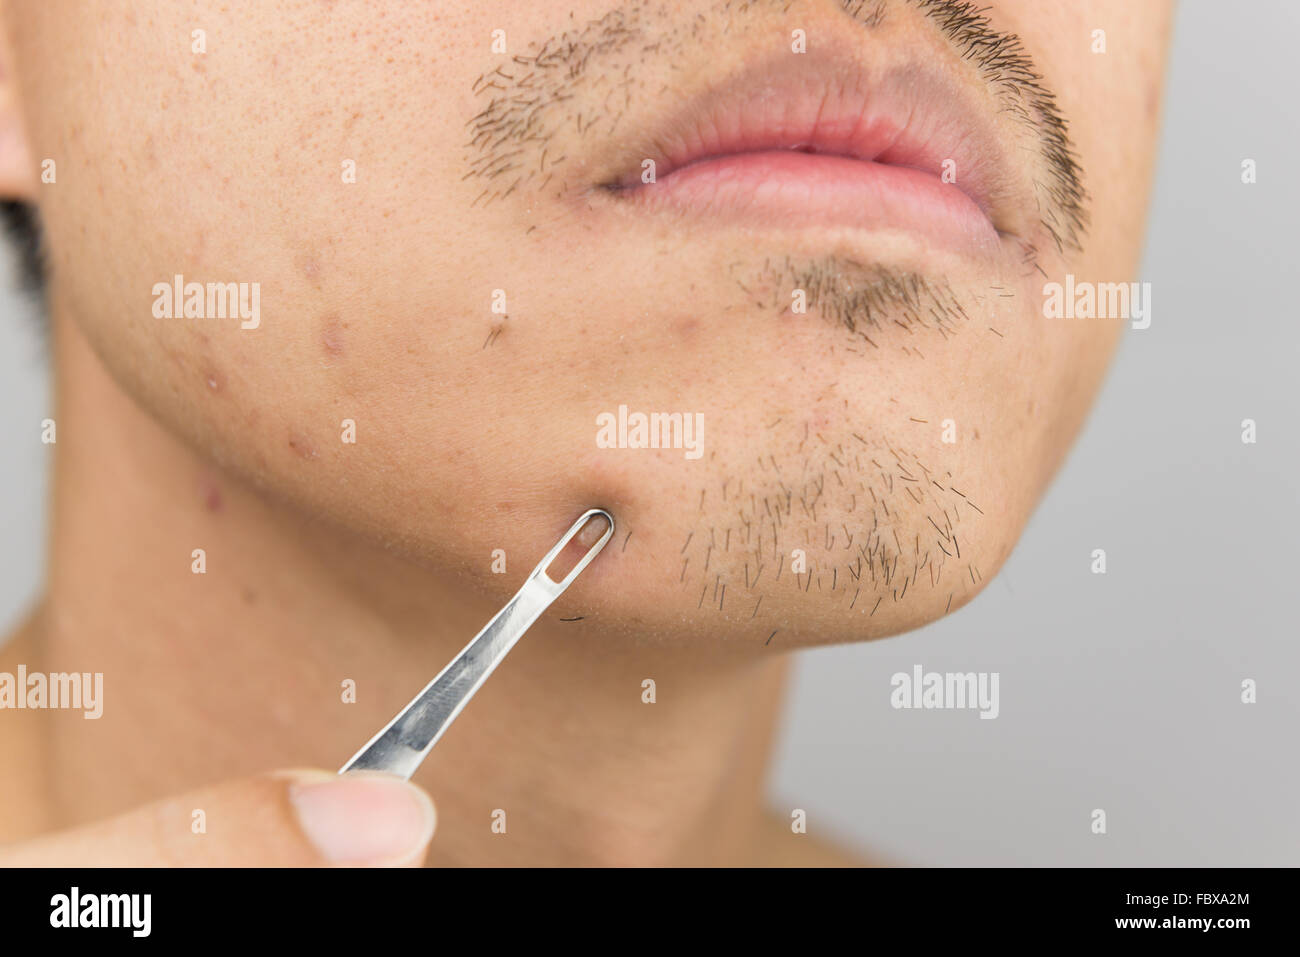 acne treatment using pimple extractor tool Stock Photo